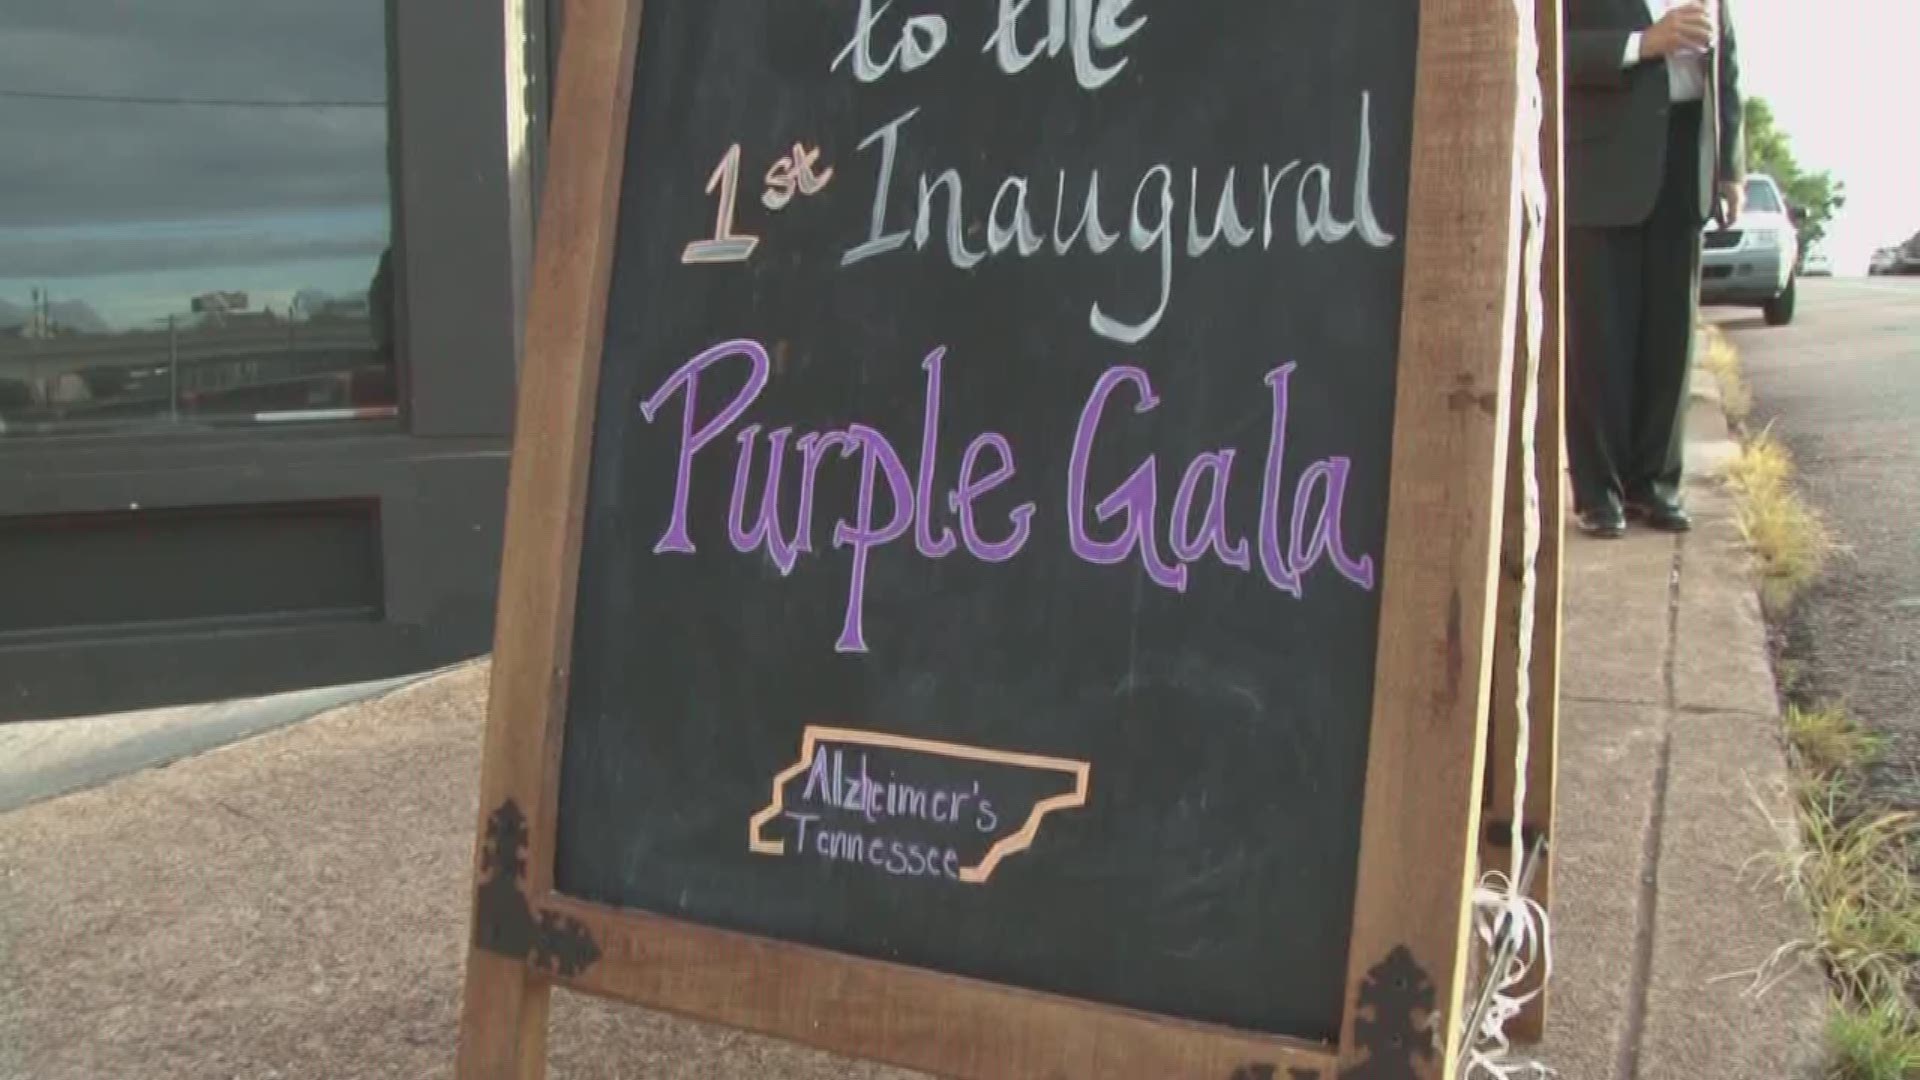 Alzheimer's Tennessee Purple GalaAug. 4, 2017The Mill & MineFriday, August 4General Admission Tickets: $100Purchase ticket at alzTennessee.org/PurpleGala2017July 26, 2017, 4pm